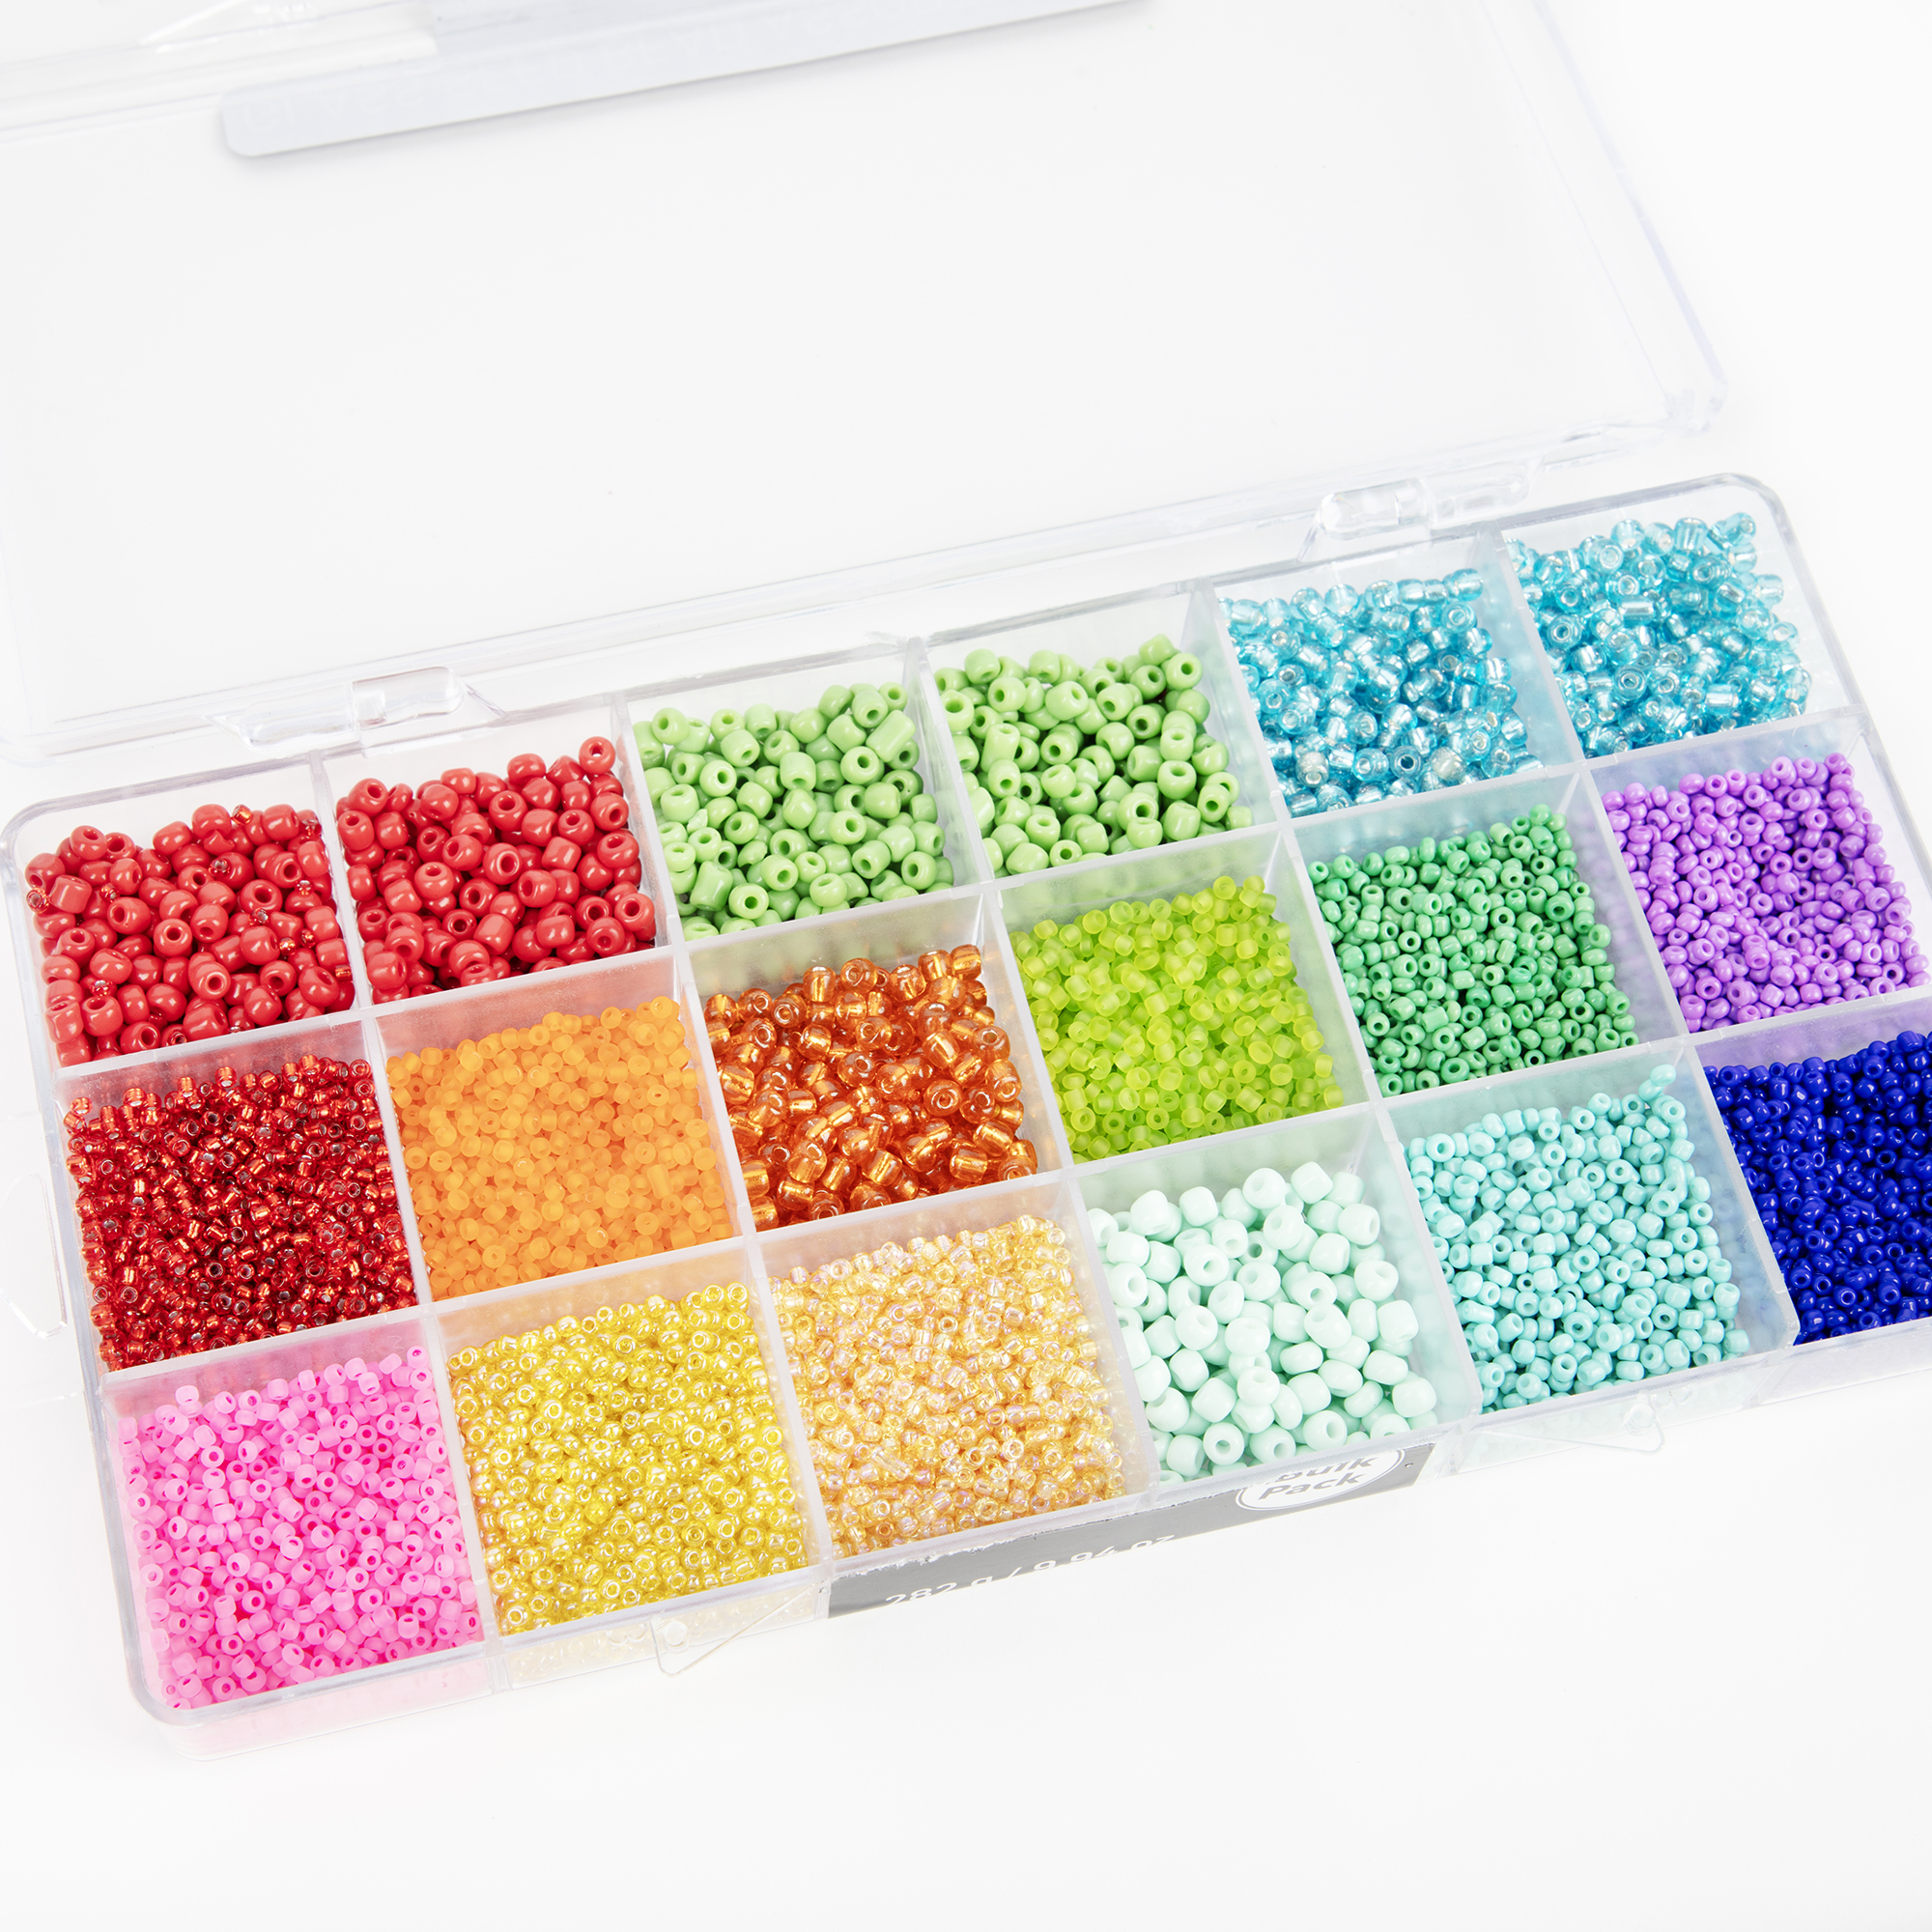 Cousin DIY Bright Rainbow Mix Glass Seed Bead Value Bulk Pack, Model AJM65022009, 1000+ Pc, Colorful Unisex Beads for Adults - image 2 of 8